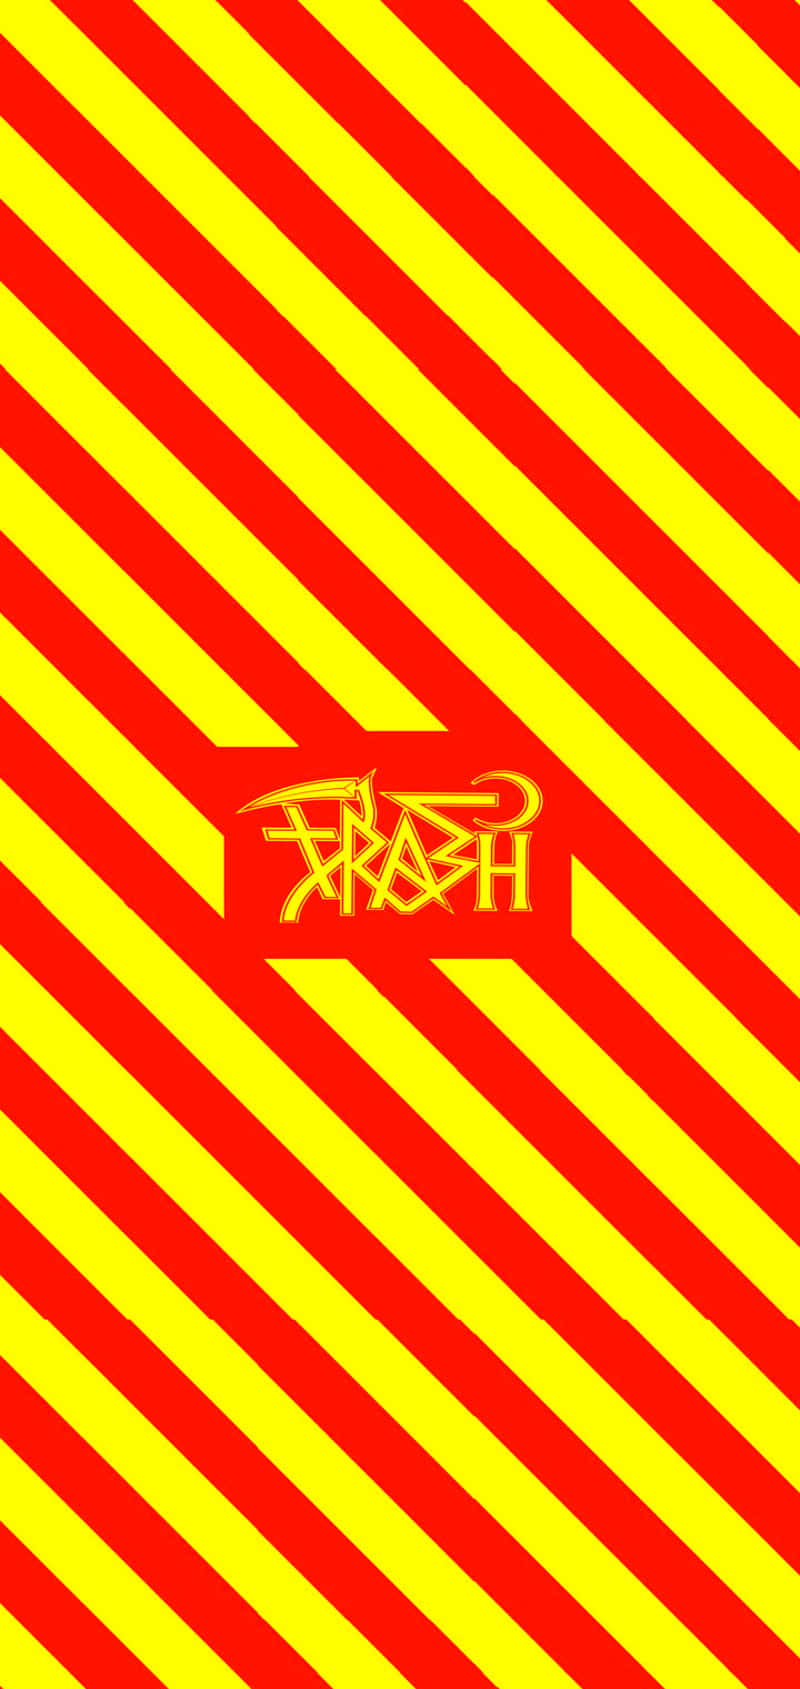 Trash Gang With Red Stripes Wallpaper